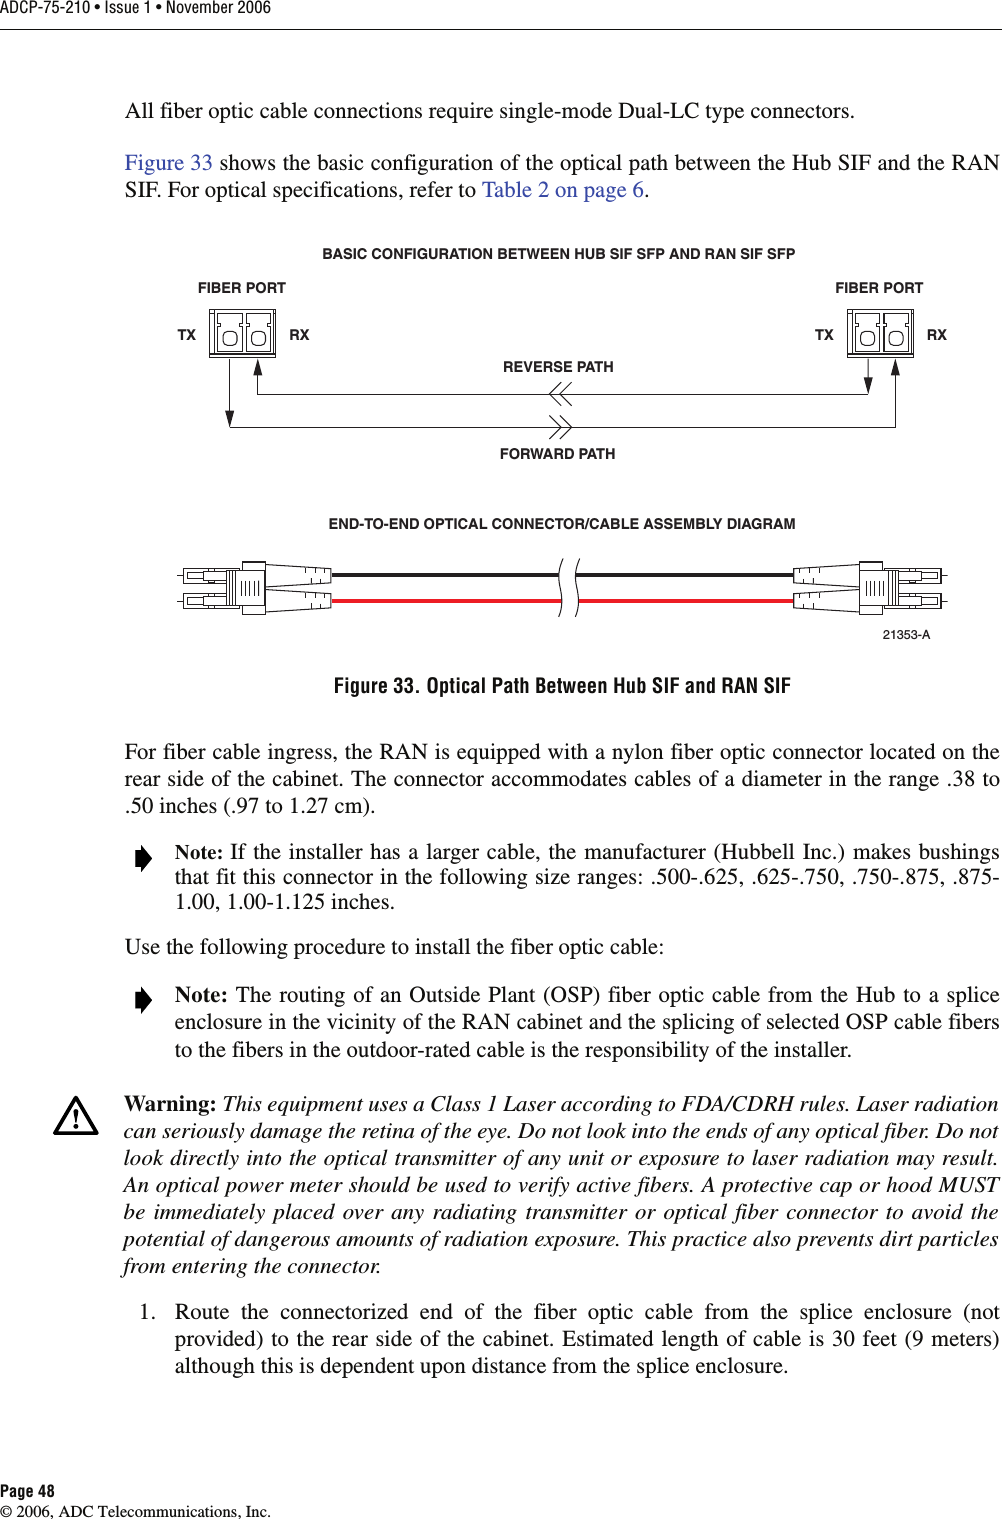 ADCP-75-210 • Issue 1 • November 2006Page 48© 2006, ADC Telecommunications, Inc.All fiber optic cable connections require single-mode Dual-LC type connectors. Figure 33 shows the basic configuration of the optical path between the Hub SIF and the RANSIF. For optical specifications, refer to Table 2 on page 6.Figure 33. Optical Path Between Hub SIF and RAN SIFFor fiber cable ingress, the RAN is equipped with a nylon fiber optic connector located on therear side of the cabinet. The connector accommodates cables of a diameter in the range .38 to.50 inches (.97 to 1.27 cm).Use the following procedure to install the fiber optic cable:1. Route the connectorized end of the fiber optic cable from the splice enclosure (notprovided) to the rear side of the cabinet. Estimated length of cable is 30 feet (9 meters)although this is dependent upon distance from the splice enclosure. Note: If the installer has a larger cable, the manufacturer (Hubbell Inc.) makes bushingsthat fit this connector in the following size ranges: .500-.625, .625-.750, .750-.875, .875-1.00, 1.00-1.125 inches.  Note: The routing of an Outside Plant (OSP) fiber optic cable from the Hub to a spliceenclosure in the vicinity of the RAN cabinet and the splicing of selected OSP cable fibersto the fibers in the outdoor-rated cable is the responsibility of the installer.Warning: This equipment uses a Class 1 Laser according to FDA/CDRH rules. Laser radiationcan seriously damage the retina of the eye. Do not look into the ends of any optical fiber. Do notlook directly into the optical transmitter of any unit or exposure to laser radiation may result.An optical power meter should be used to verify active fibers. A protective cap or hood MUSTbe immediately placed over any radiating transmitter or optical fiber connector to avoid thepotential of dangerous amounts of radiation exposure. This practice also prevents dirt particlesfrom entering the connector.FIBER PORTTX RXFIBER PORTTX RXREVERSE PATHBASIC CONFIGURATION BETWEEN HUB SIF SFP AND RAN SIF SFPEND-TO-END OPTICAL CONNECTOR/CABLE ASSEMBLY DIAGRAMFORWARD PATH21353-A